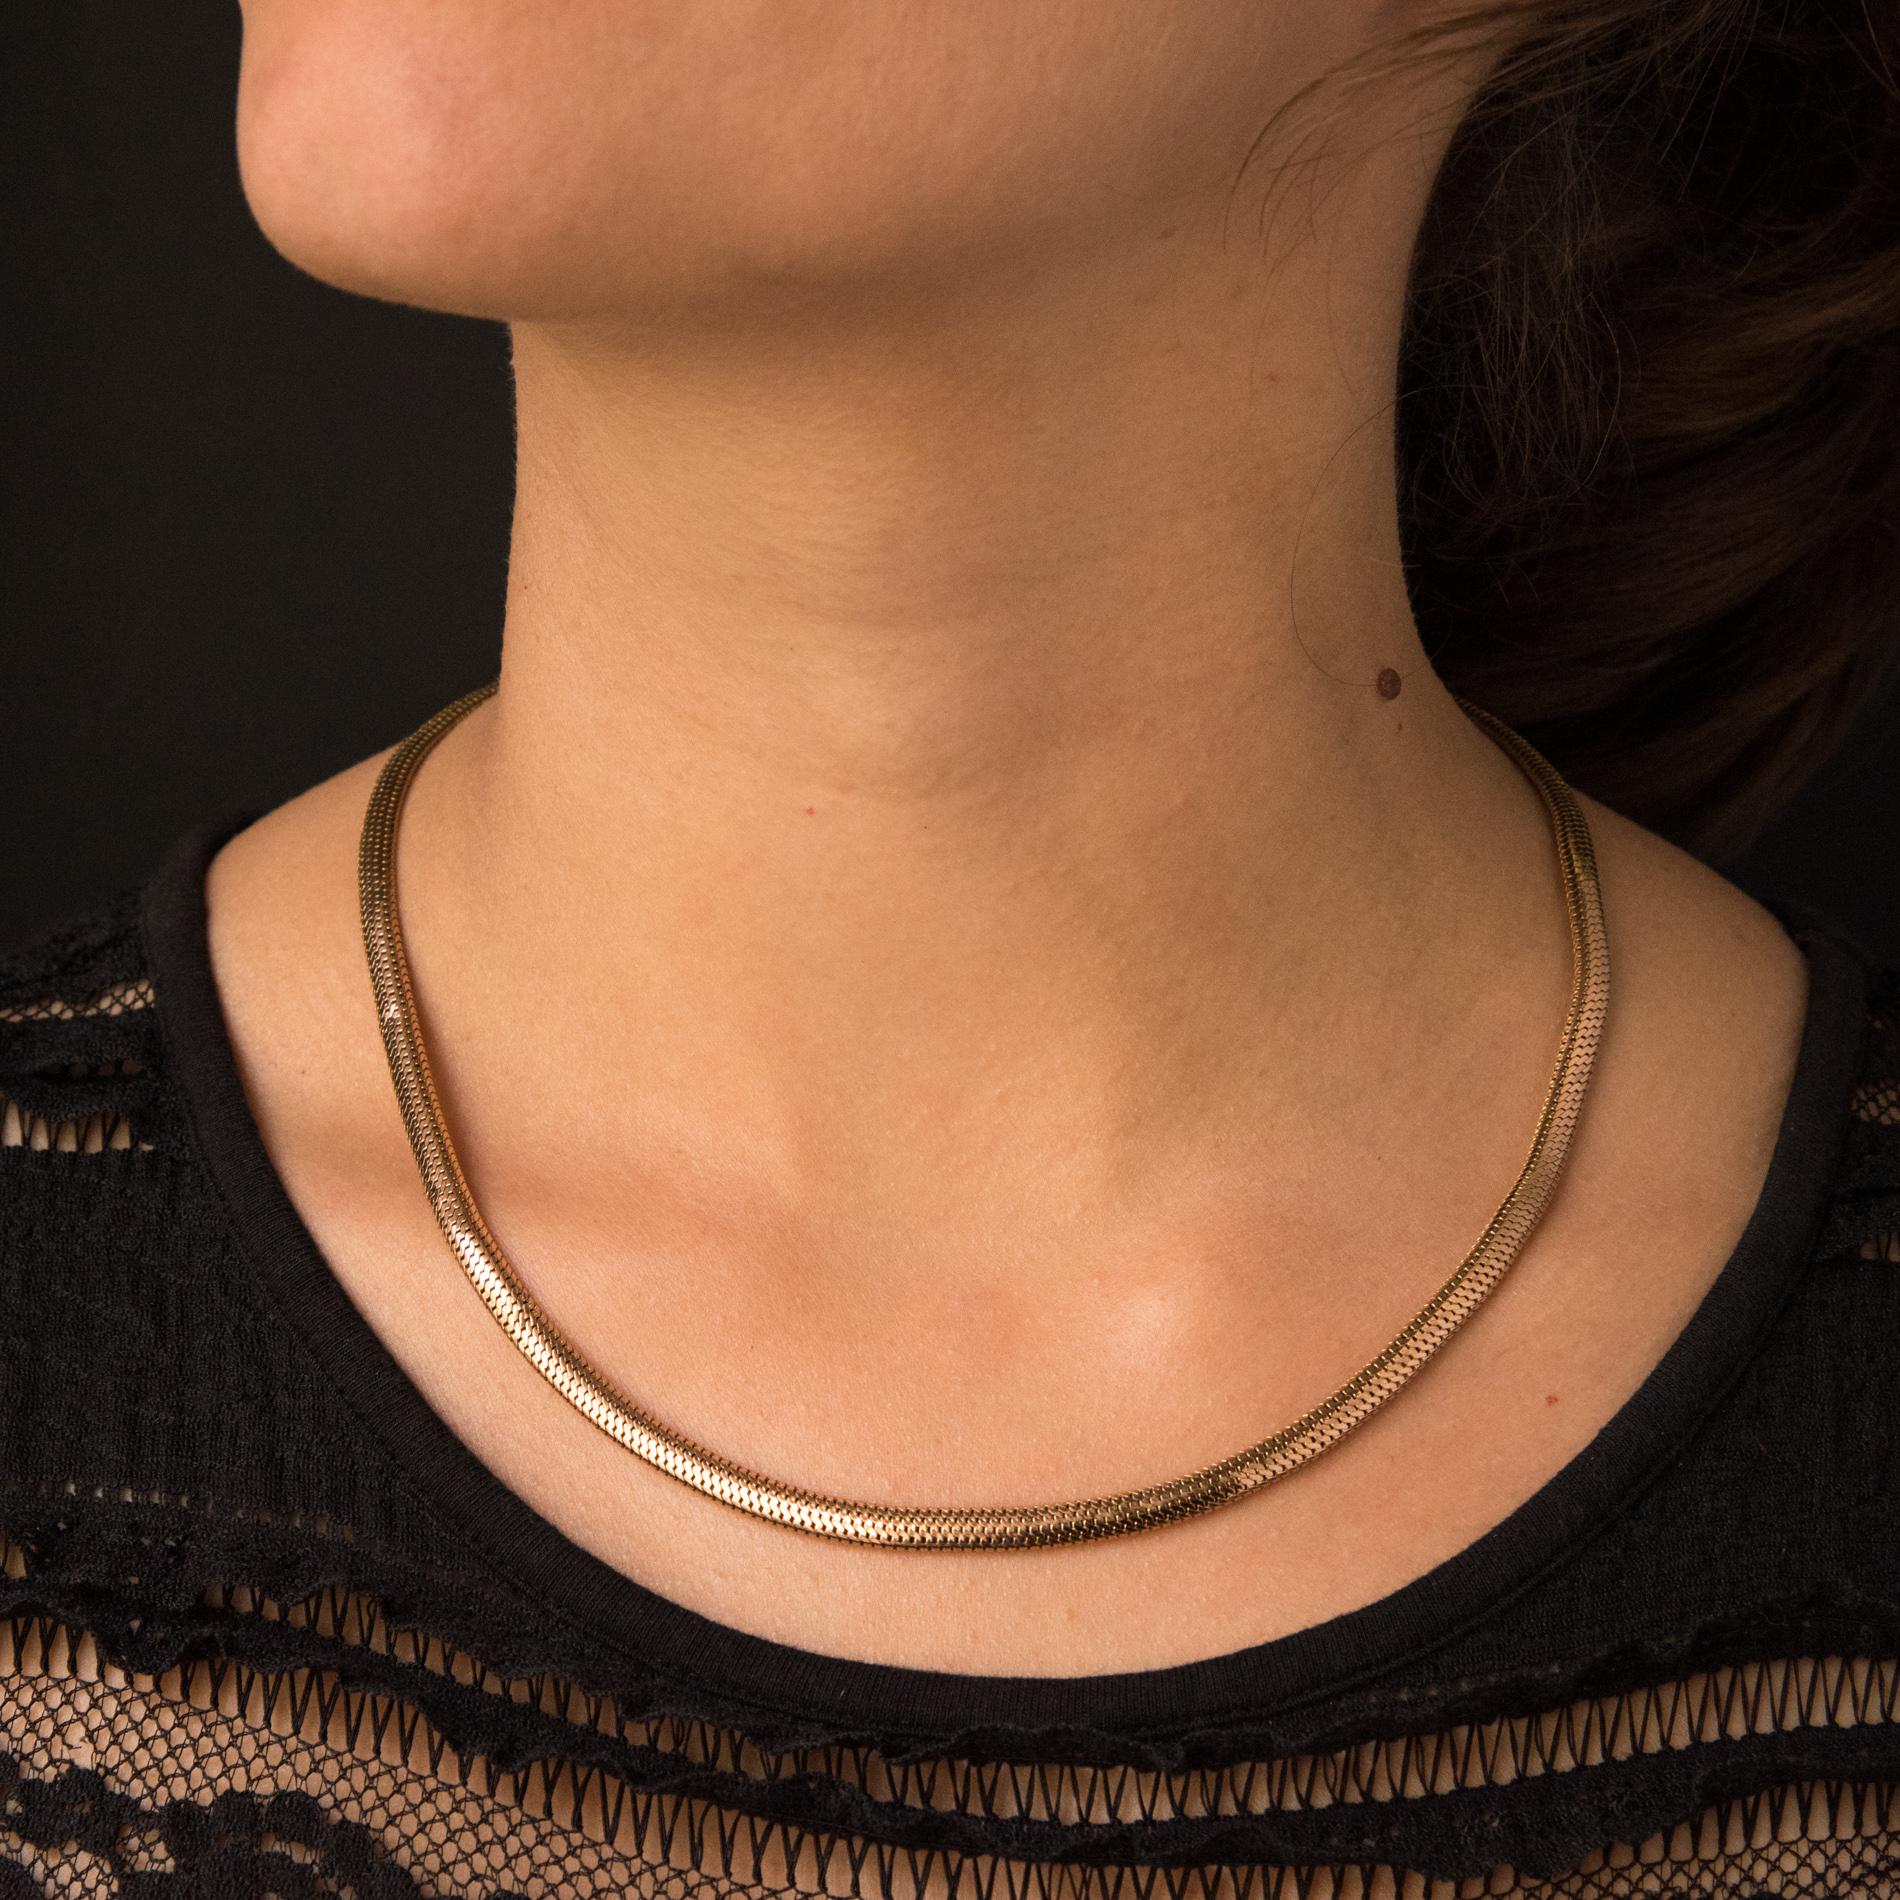 Necklace in 18 karats rose gold, eagle's head hallmark.
Made of a snake mesh, this beautiful rose gold necklace is placed on the neckline. The clasp is a carabiner.
Length: 47 cm, width: 4.7 mm, thickness: 2.4 mm.
Total weight of the jewel: 17,5 g